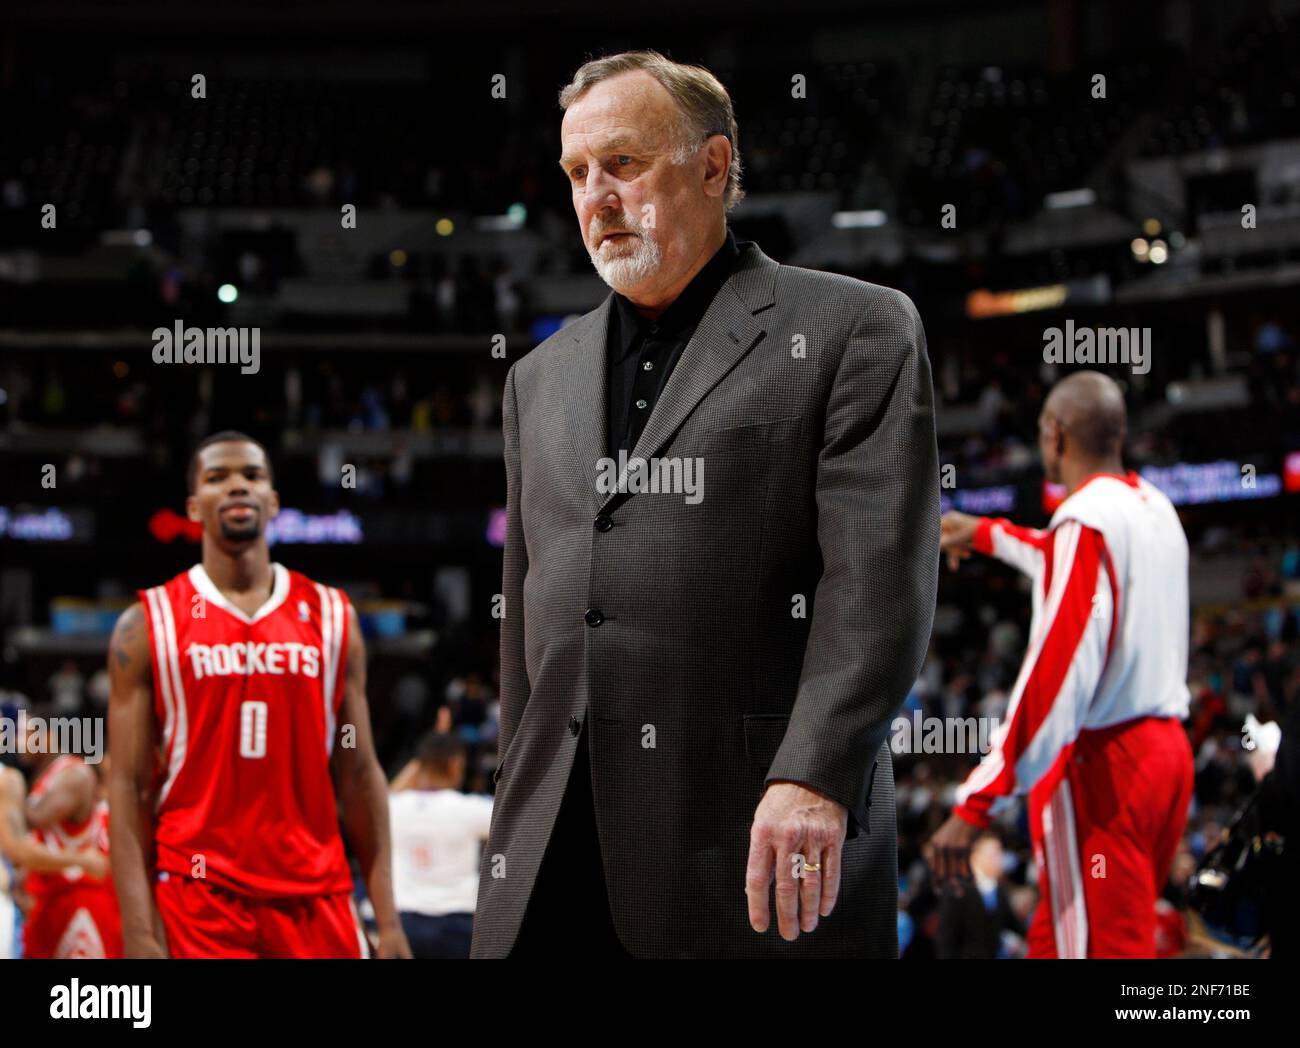 Houston Rockets head coach Rick Adelman heads off the court after